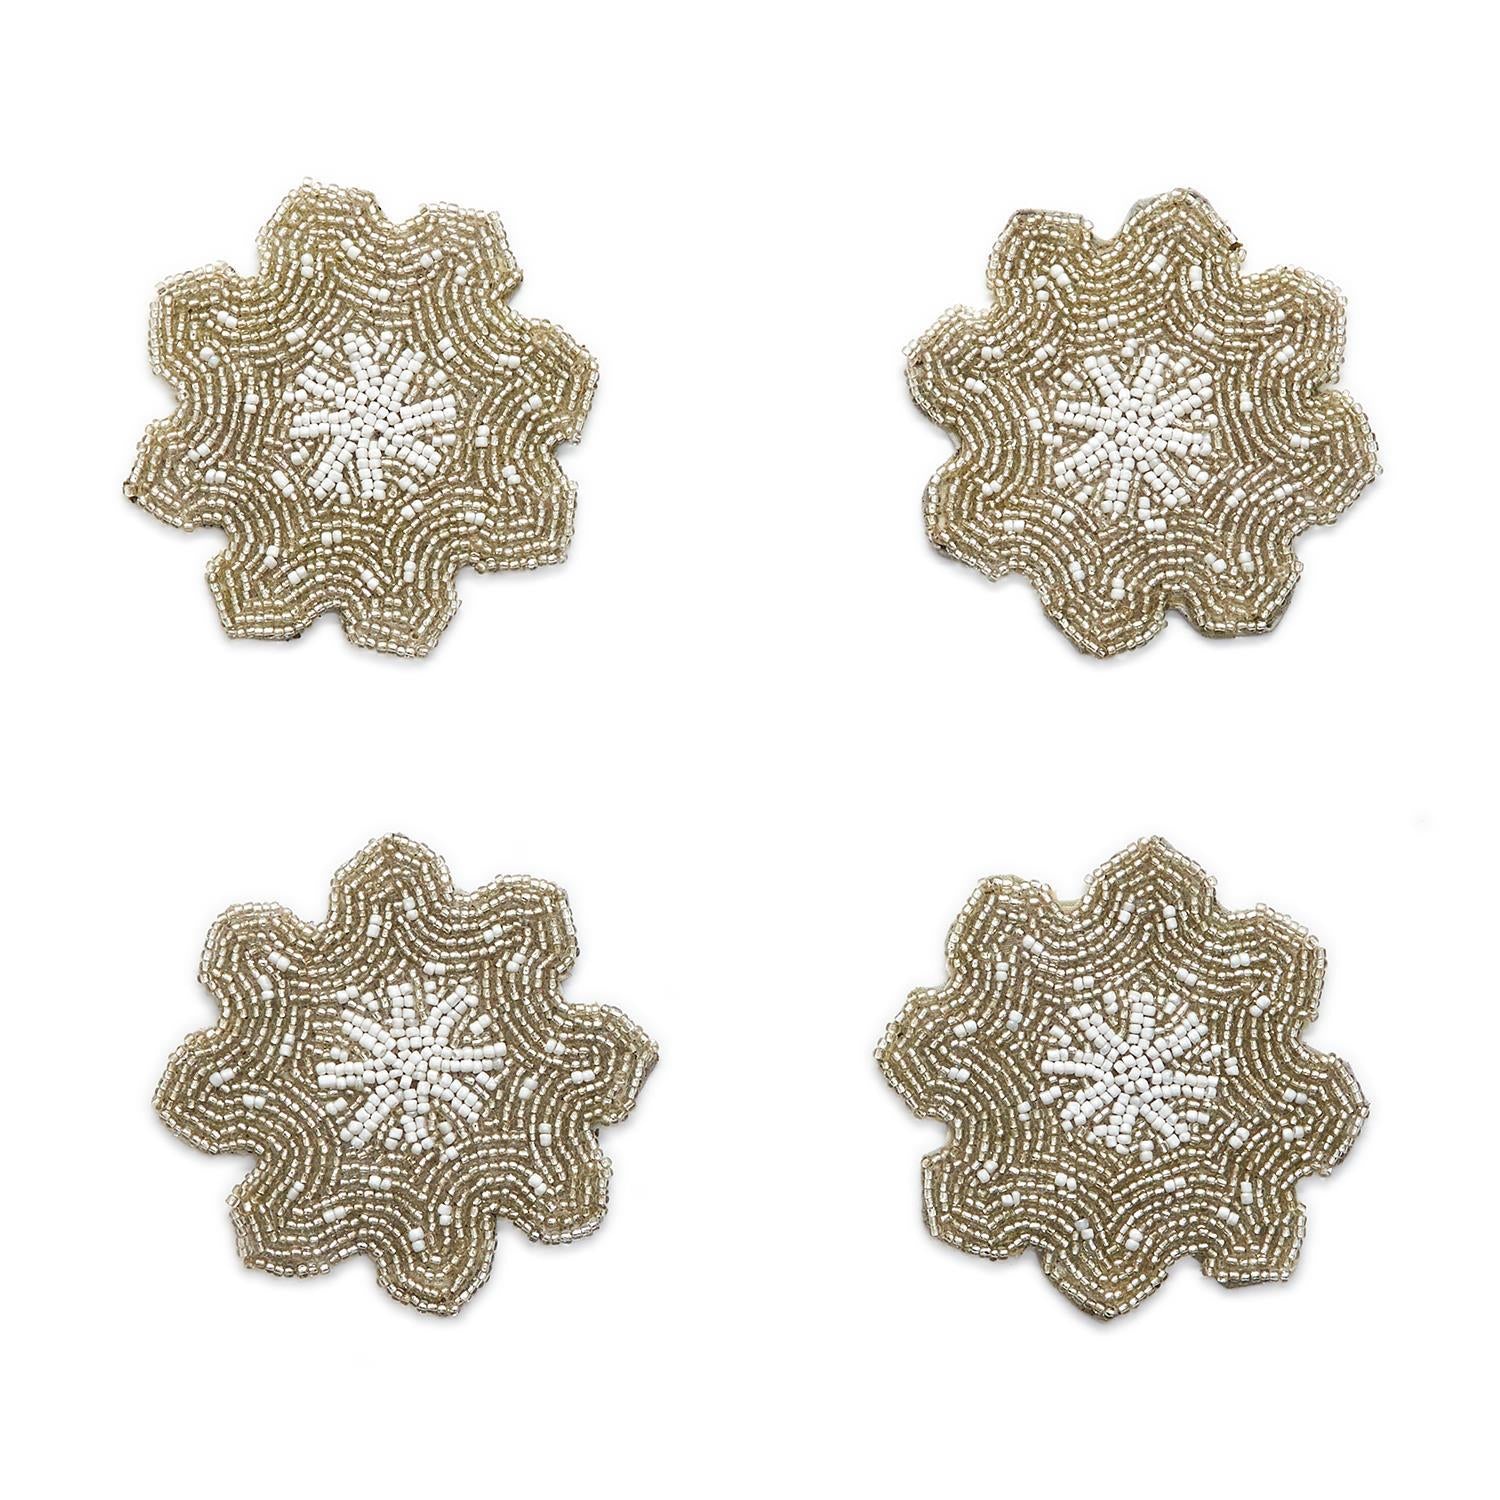 Shimmering Snowflake Hand-Beaded Embroidery Coasters (Set of 4)